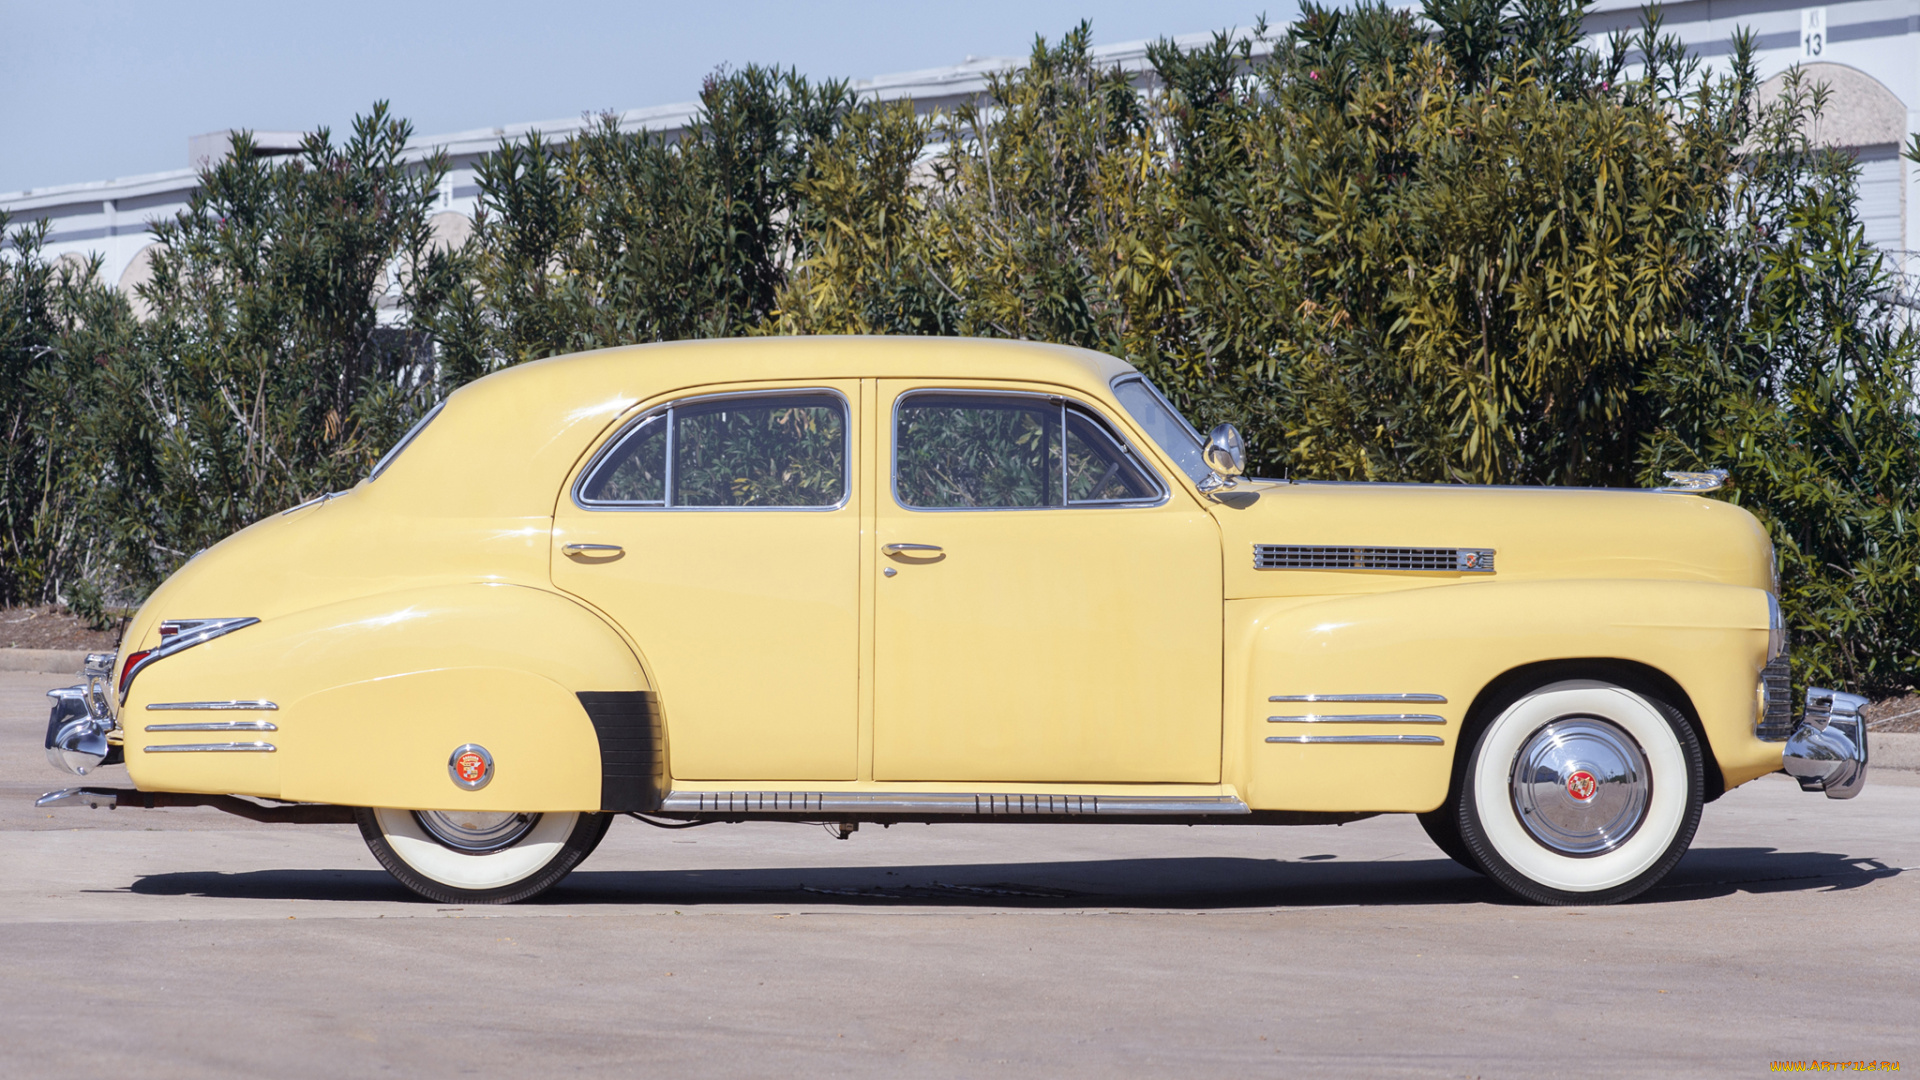 cadillac, sixty, one, touring, sedan, deluxe, 1941, автомобили, cadillac, sixty, one, touring, sedan, deluxe, 1941